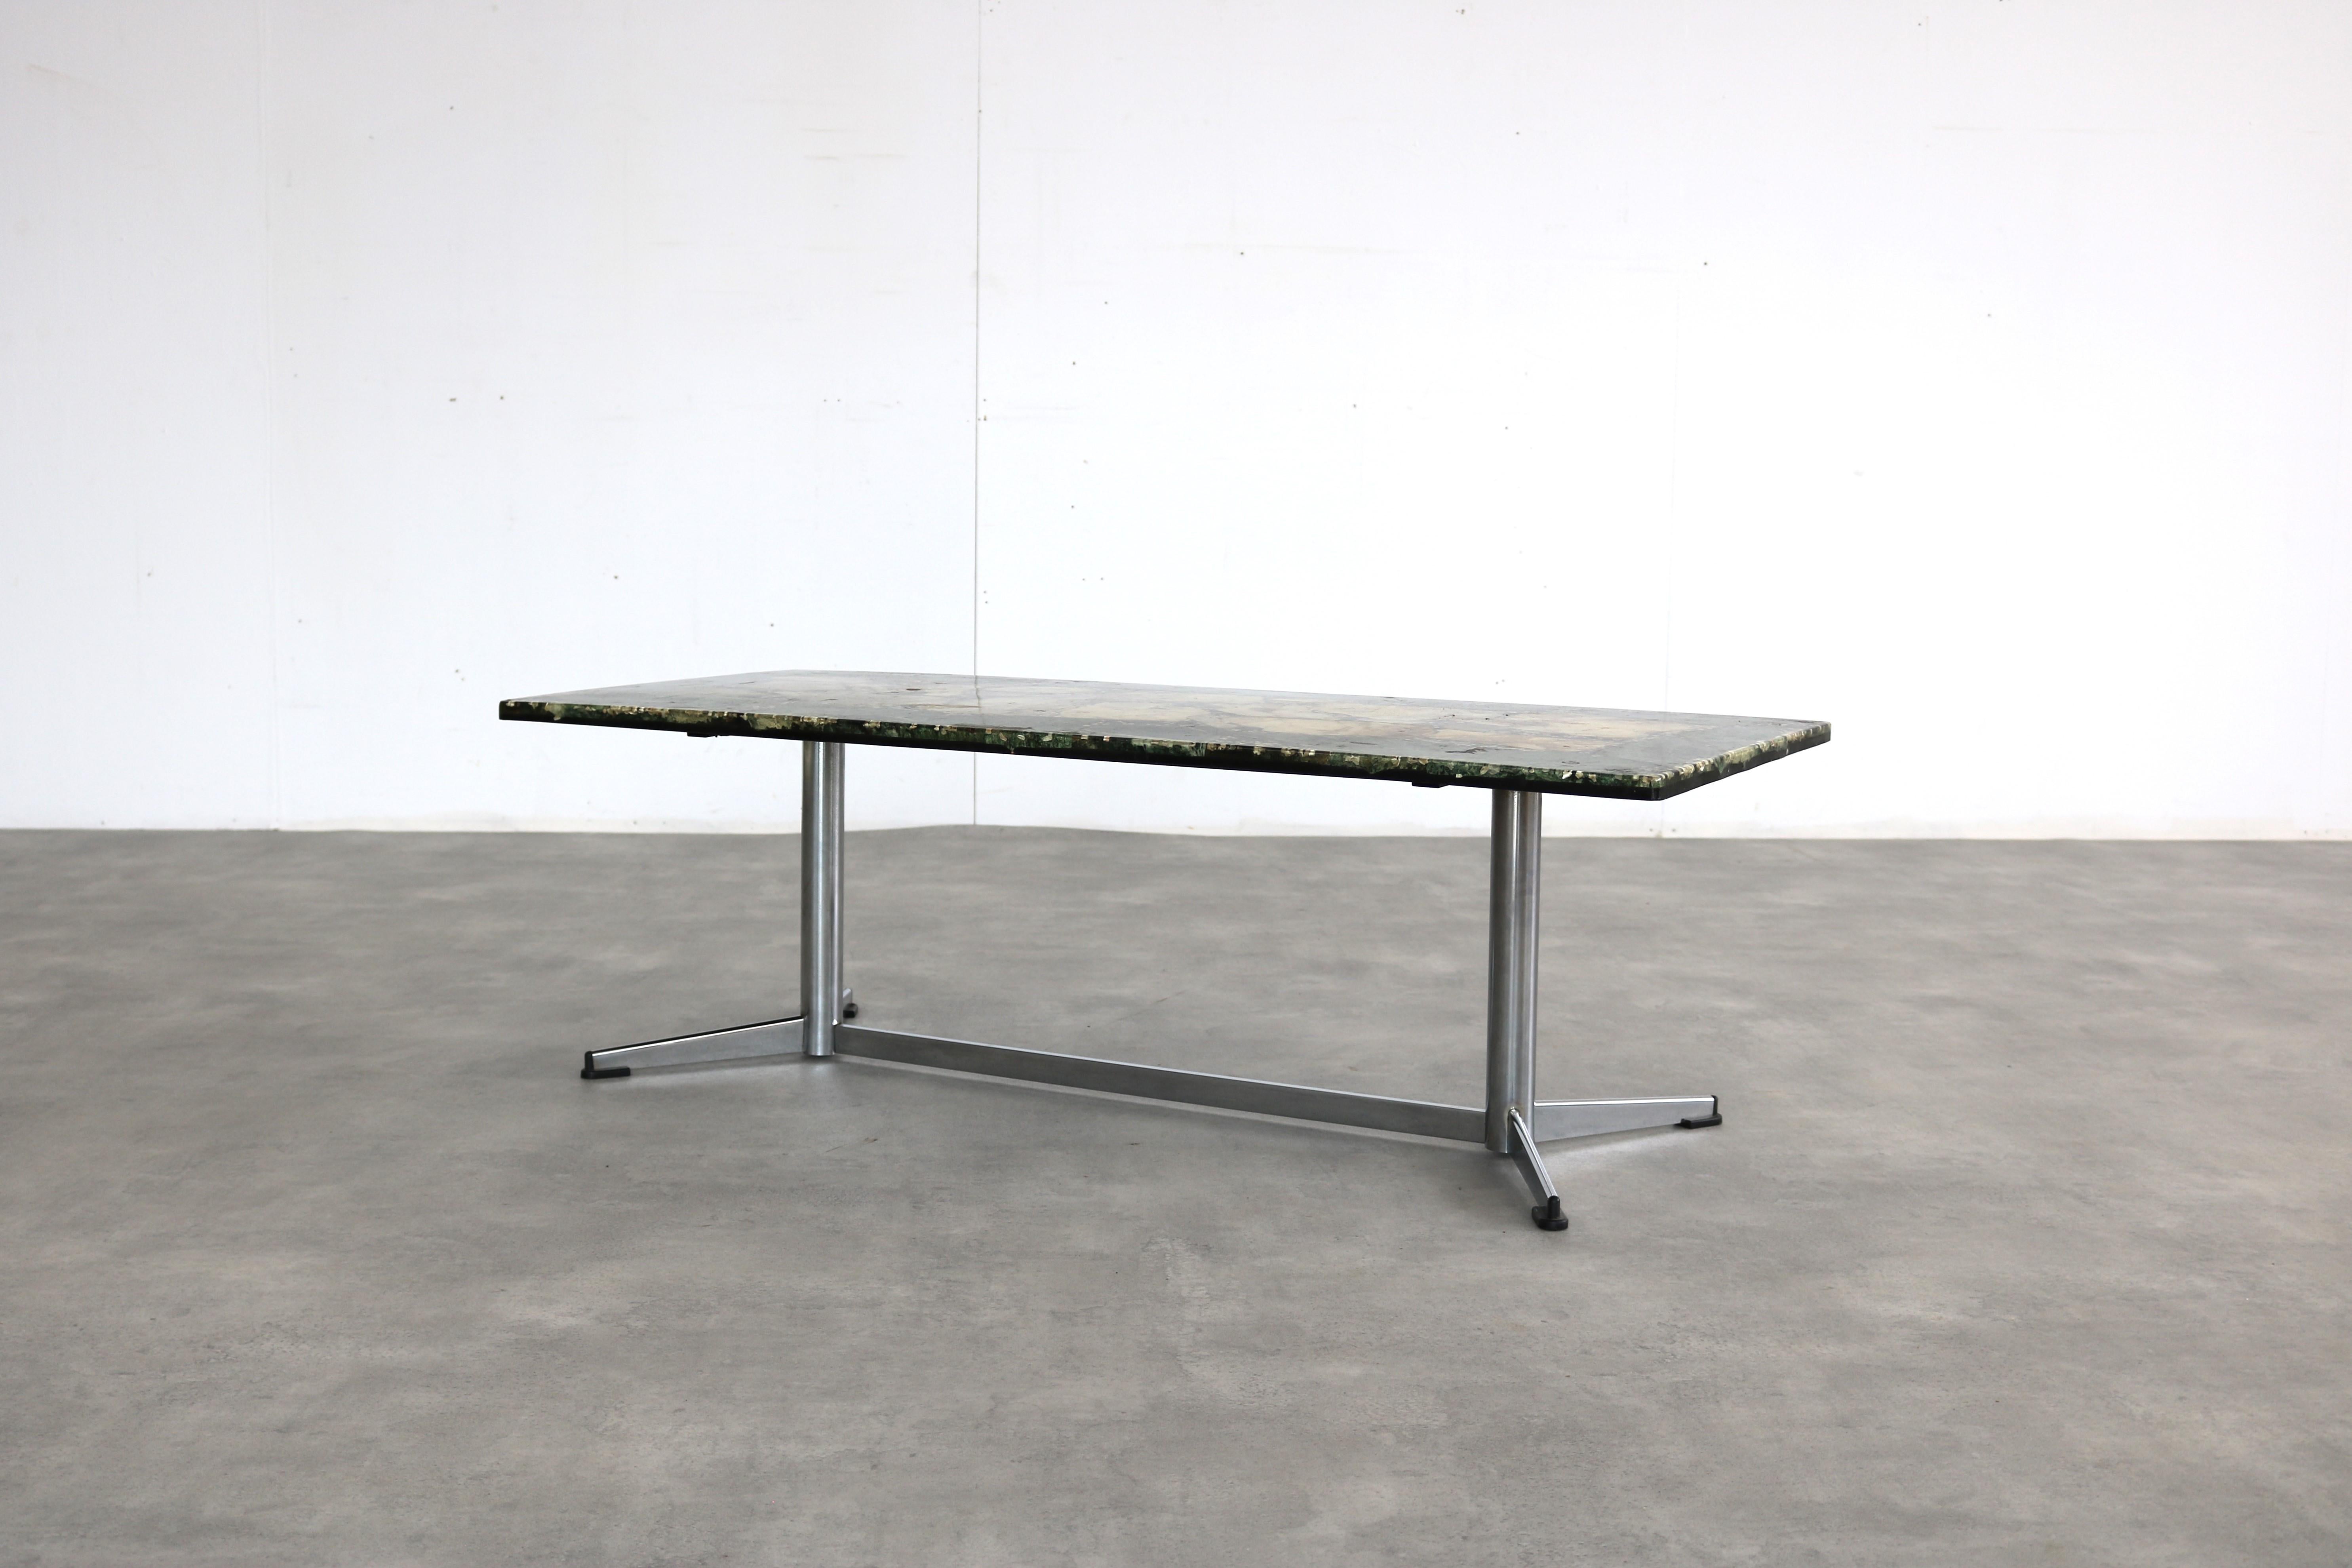 vintage coffee table | table | 60's

period | 60's
design | unknown | The Netherlands
condition | good | light signs of use
size | 38 x 120 x 50 (hxwxd)

details | metal; chrome; stone; epoxy; marble;

article number | 2164